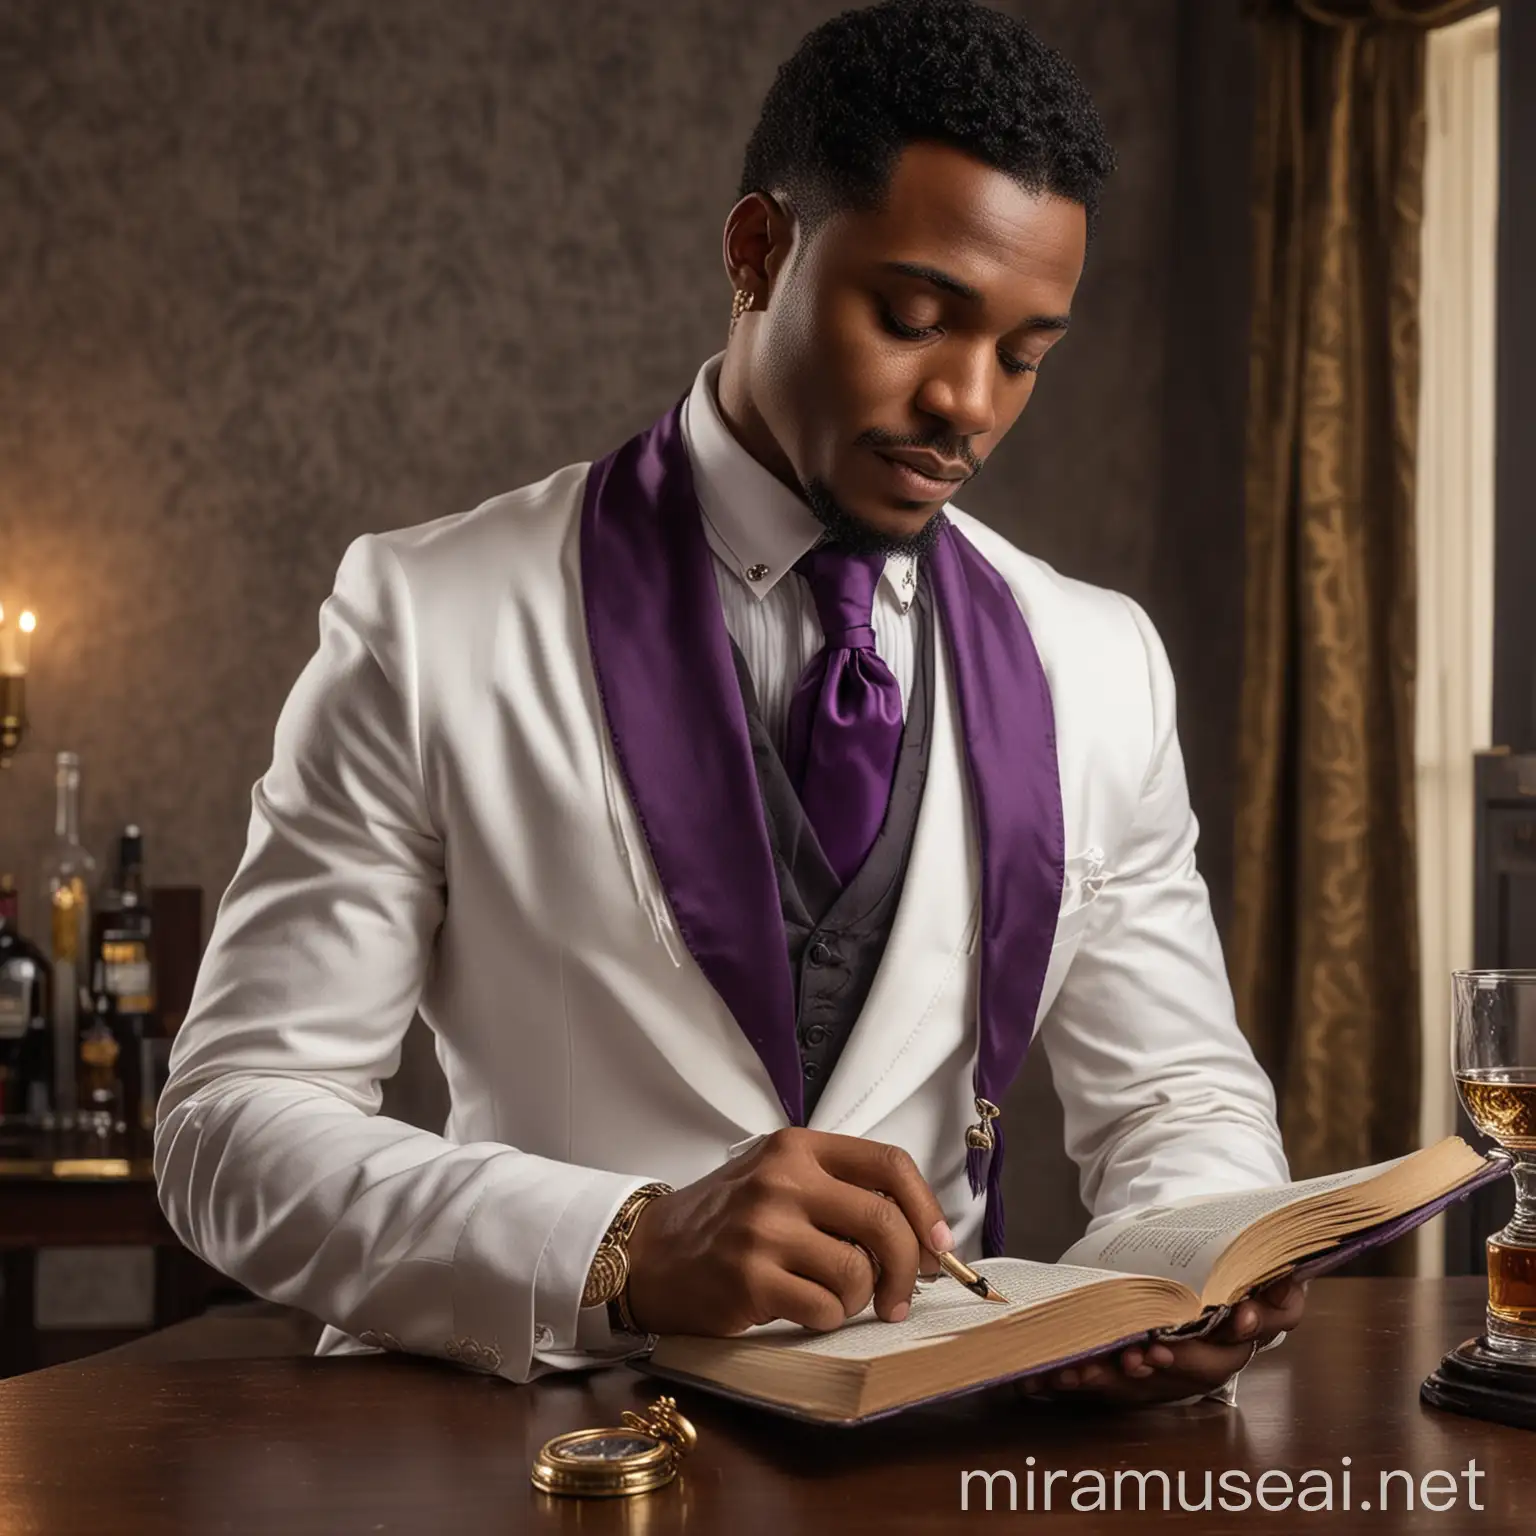 A black man in a elegant white and black suit and tie with a purple stole and gold pocket watch and jewelry reading a book standing and drinking whiskey